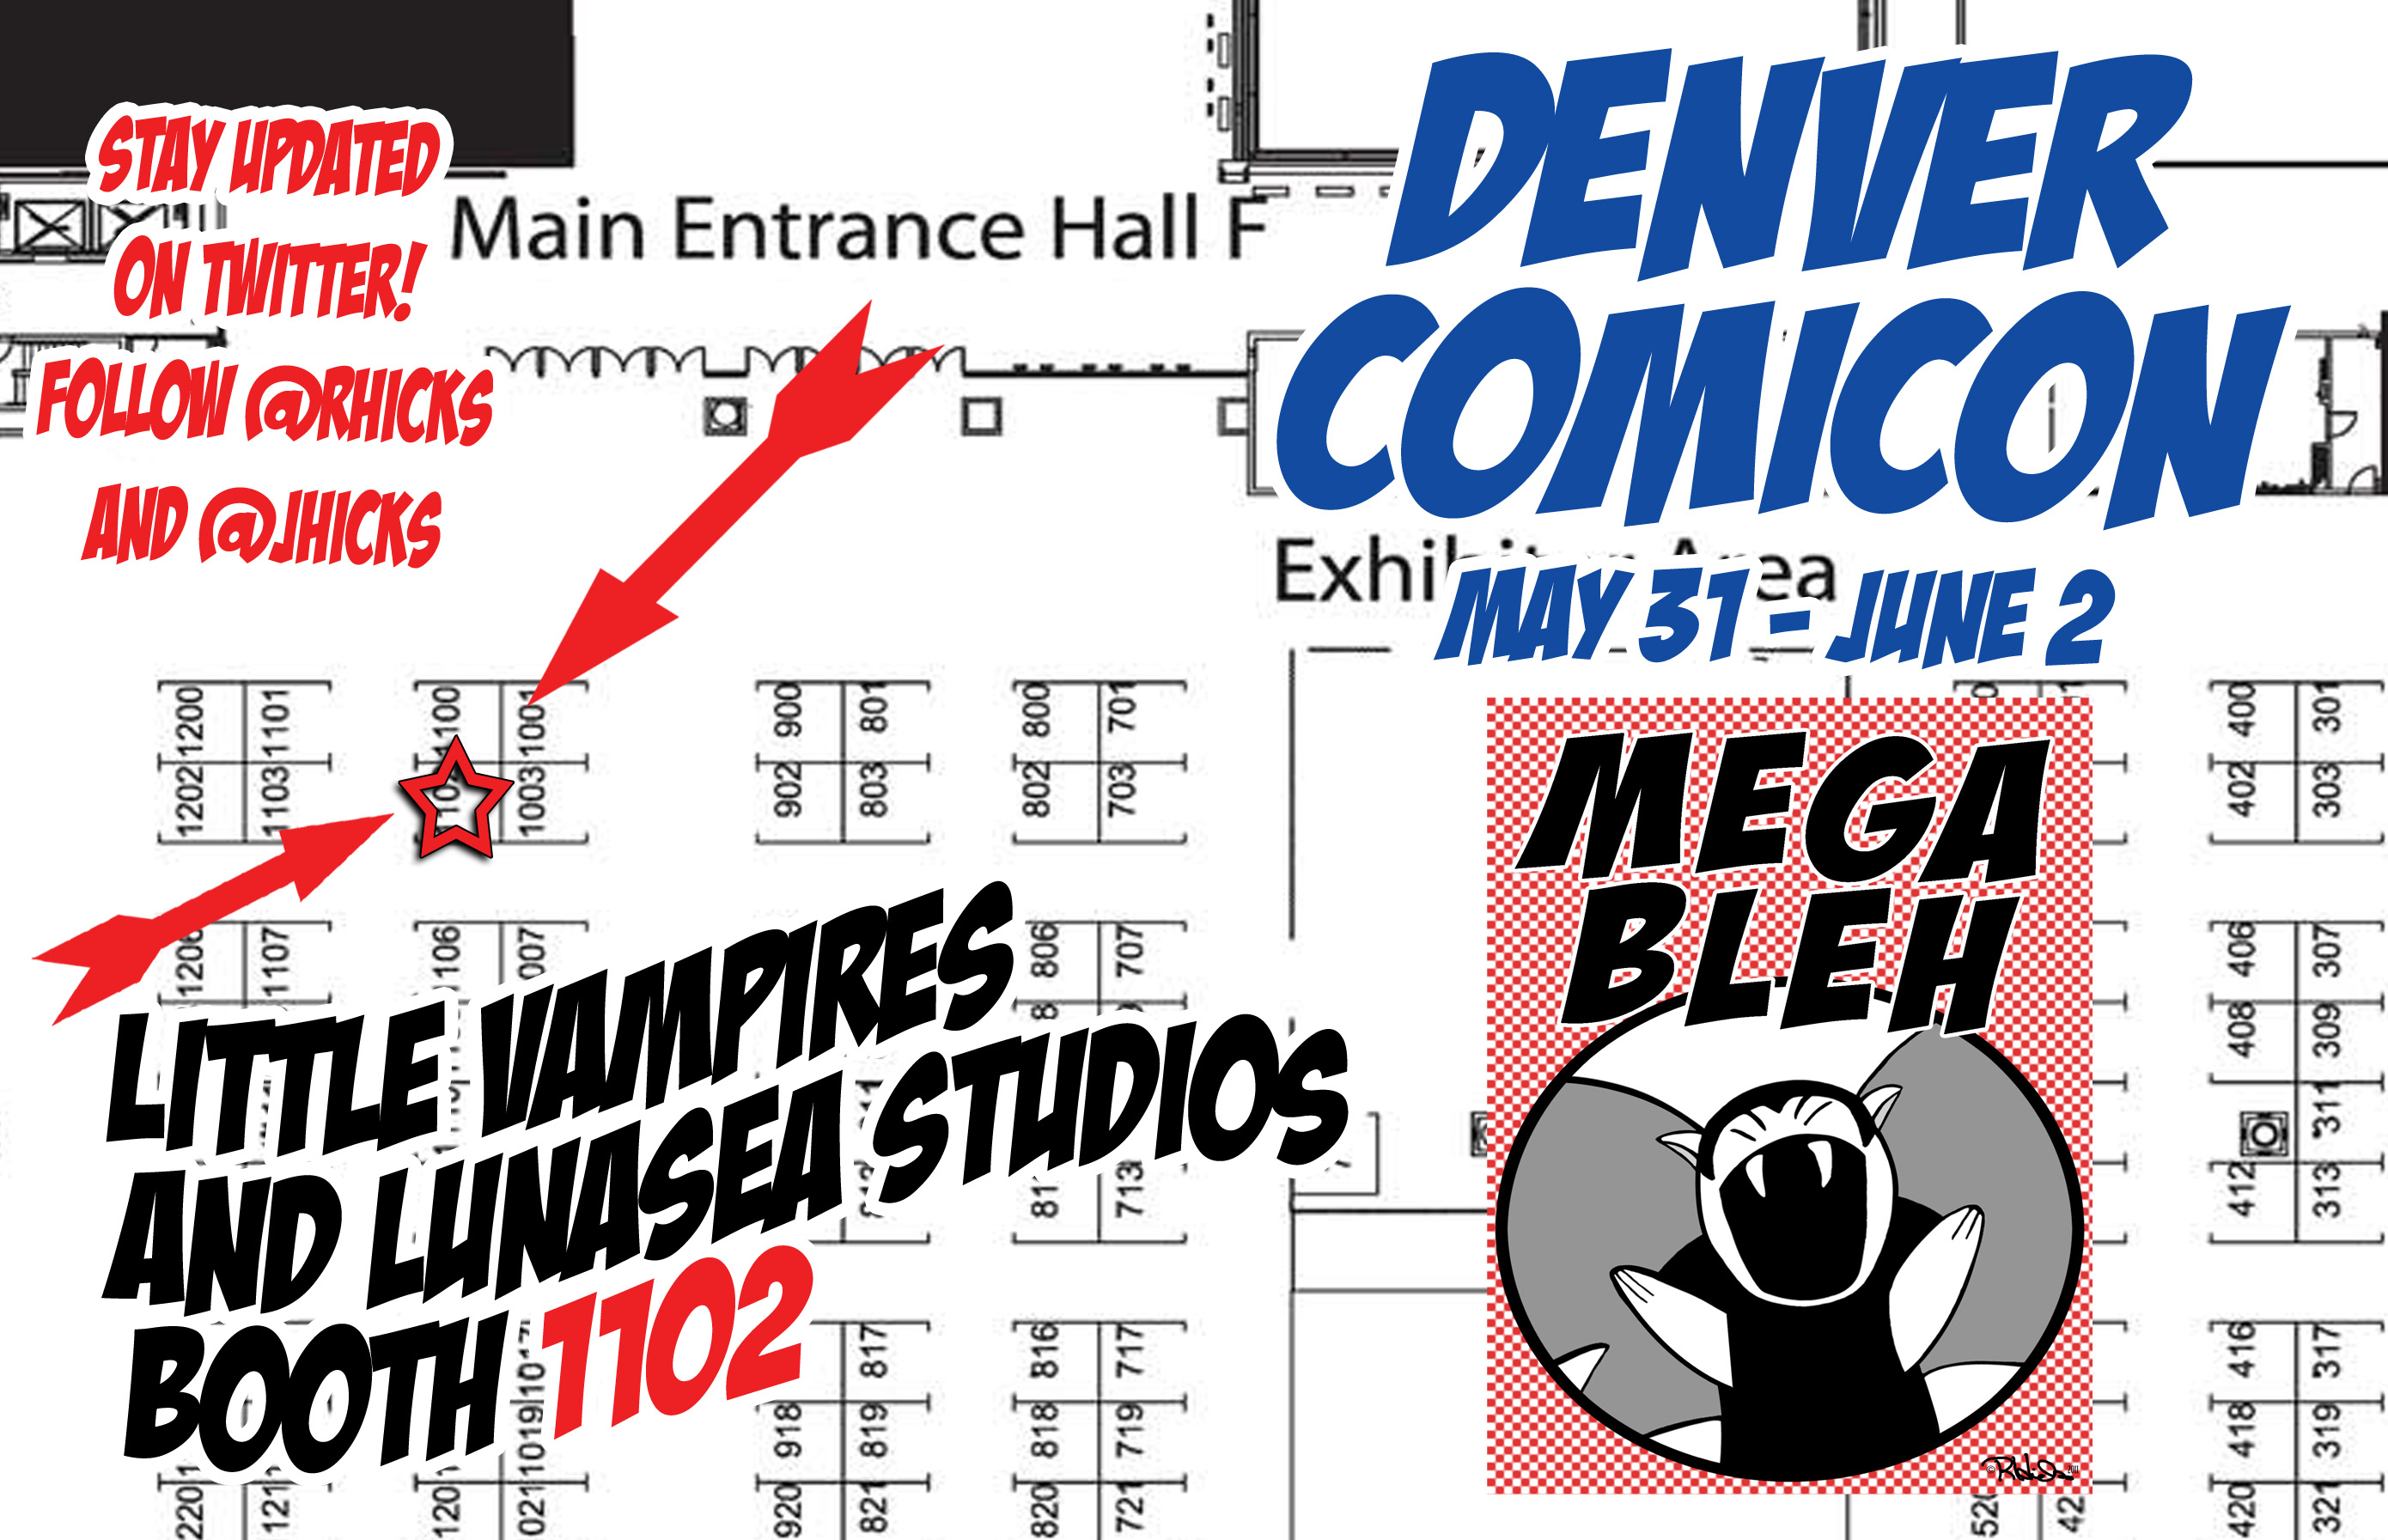 Denver Comicon 2013 exhibitor floor map with the Little Vampires booth highlighted